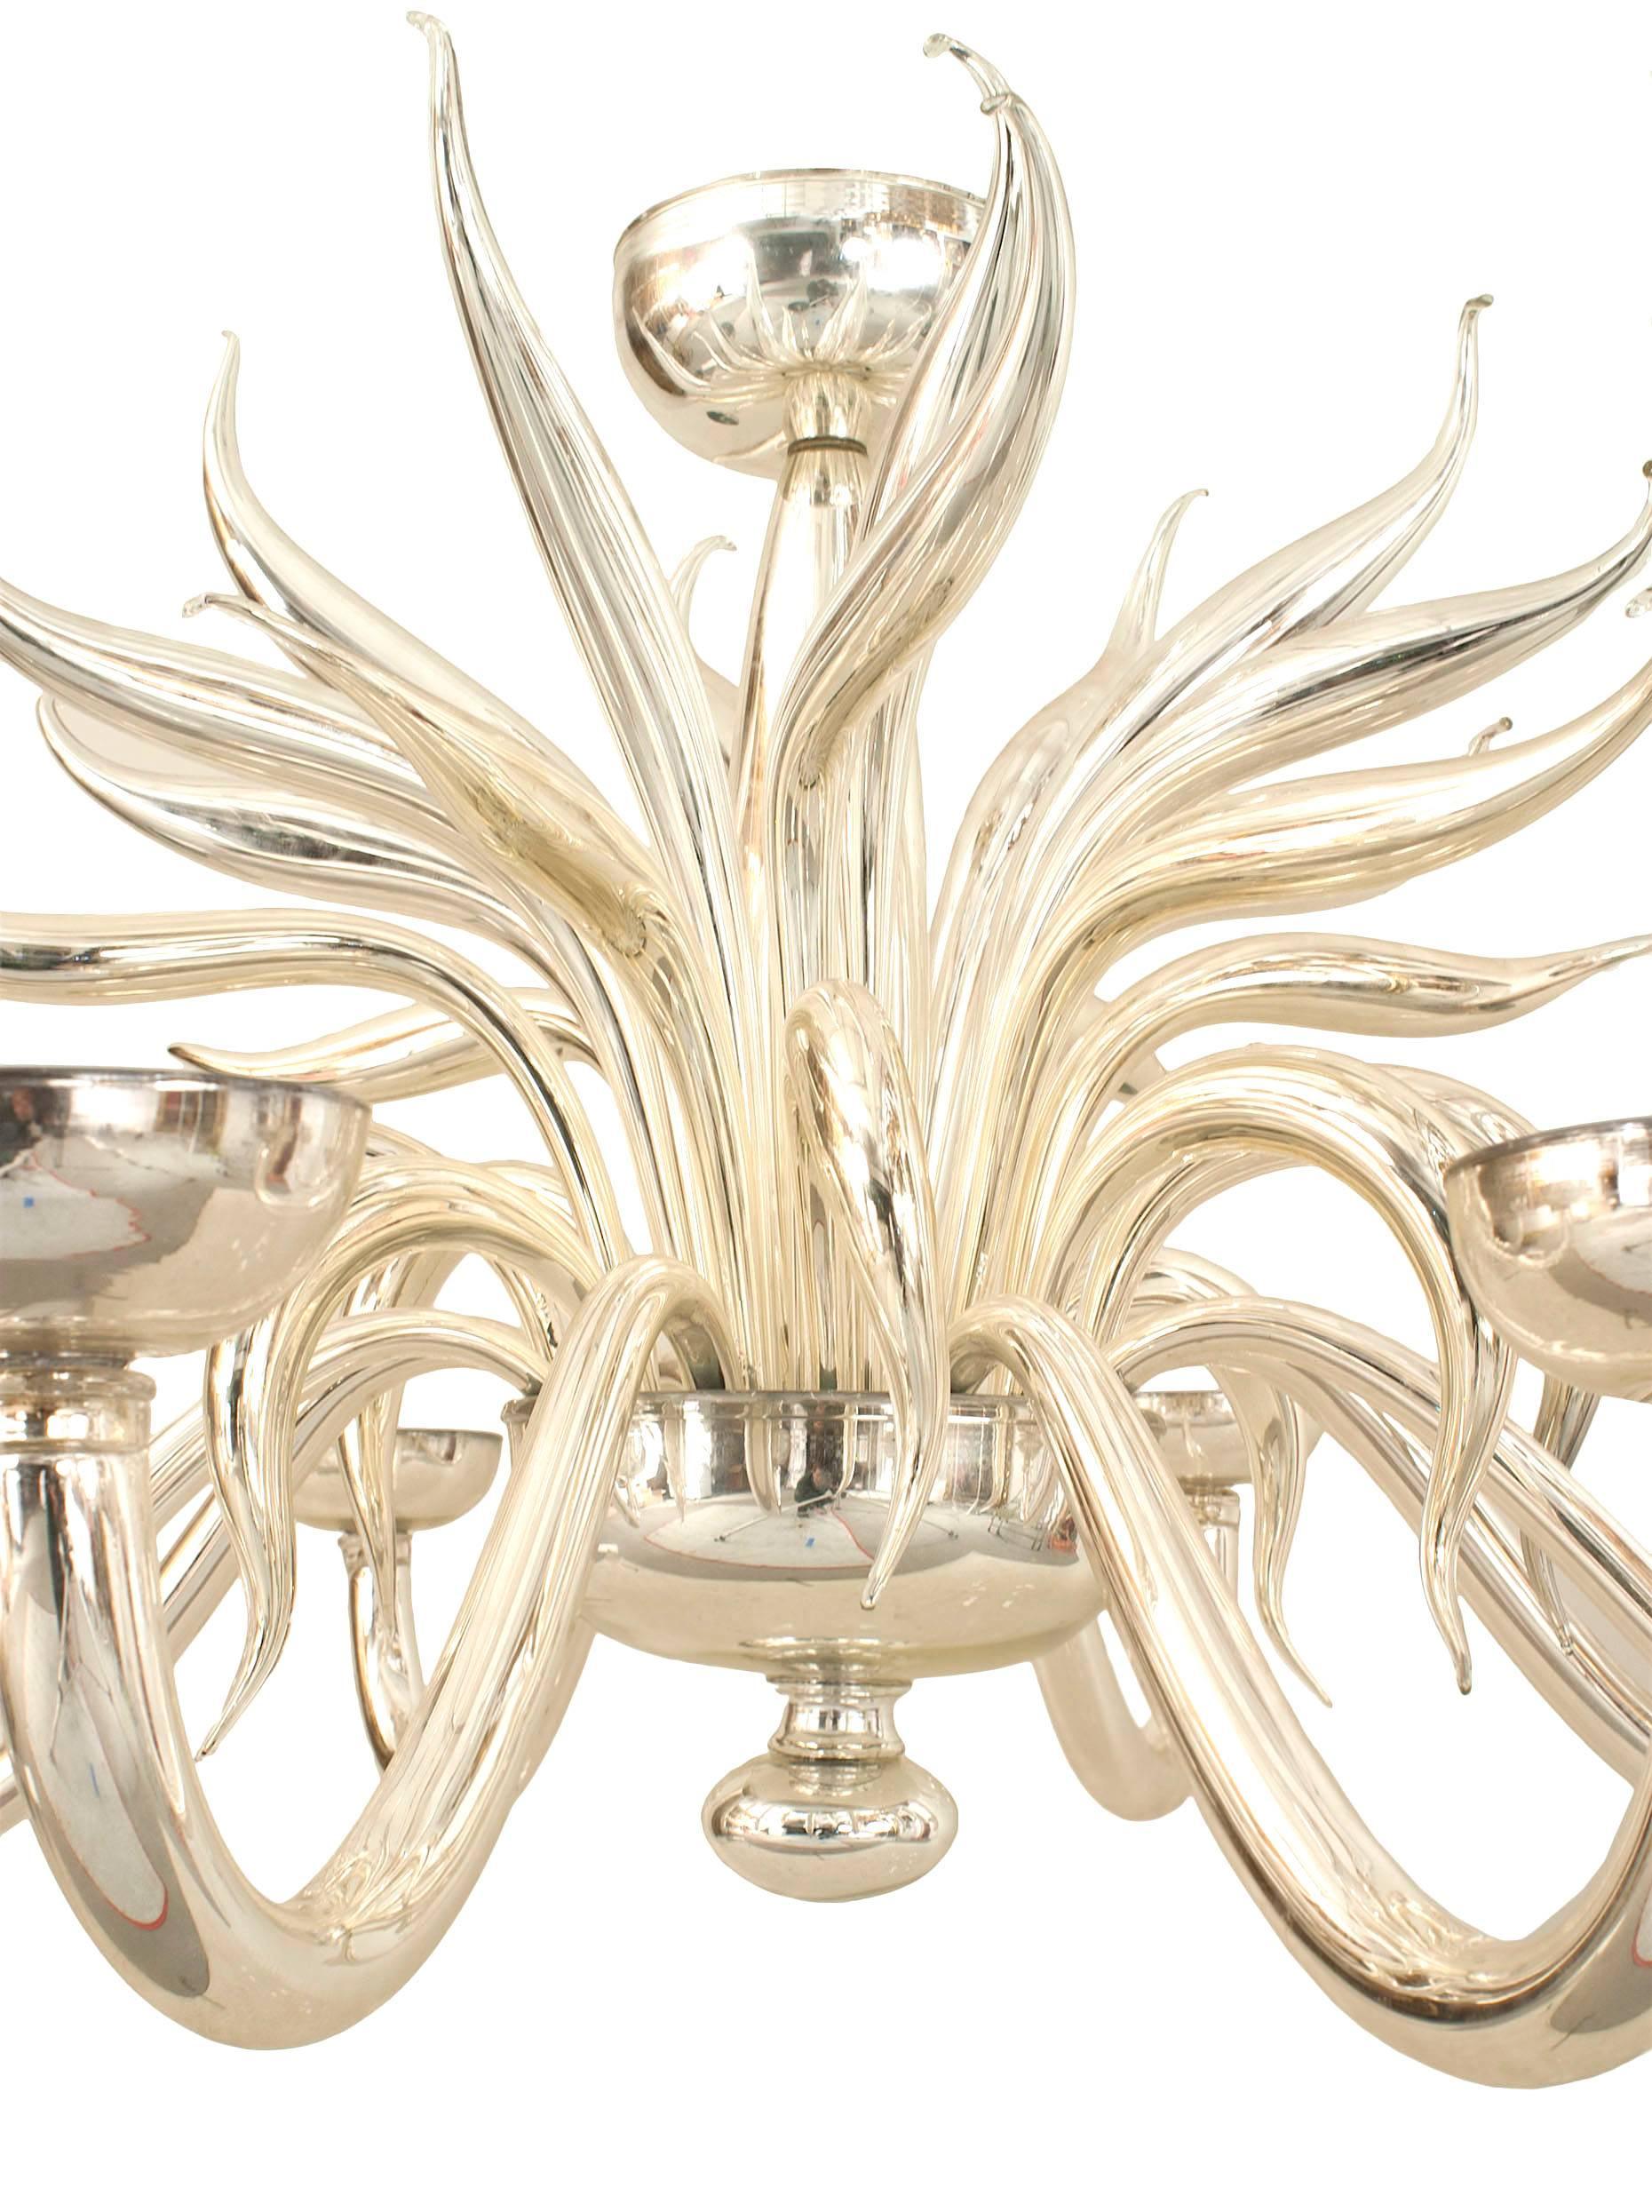 Post-War Design Italian Venetian Murano silvered glass chandelier with multiple scroll 8 arms and multiple scrolls emanating from a center shaft with a final and bowl bottom.
